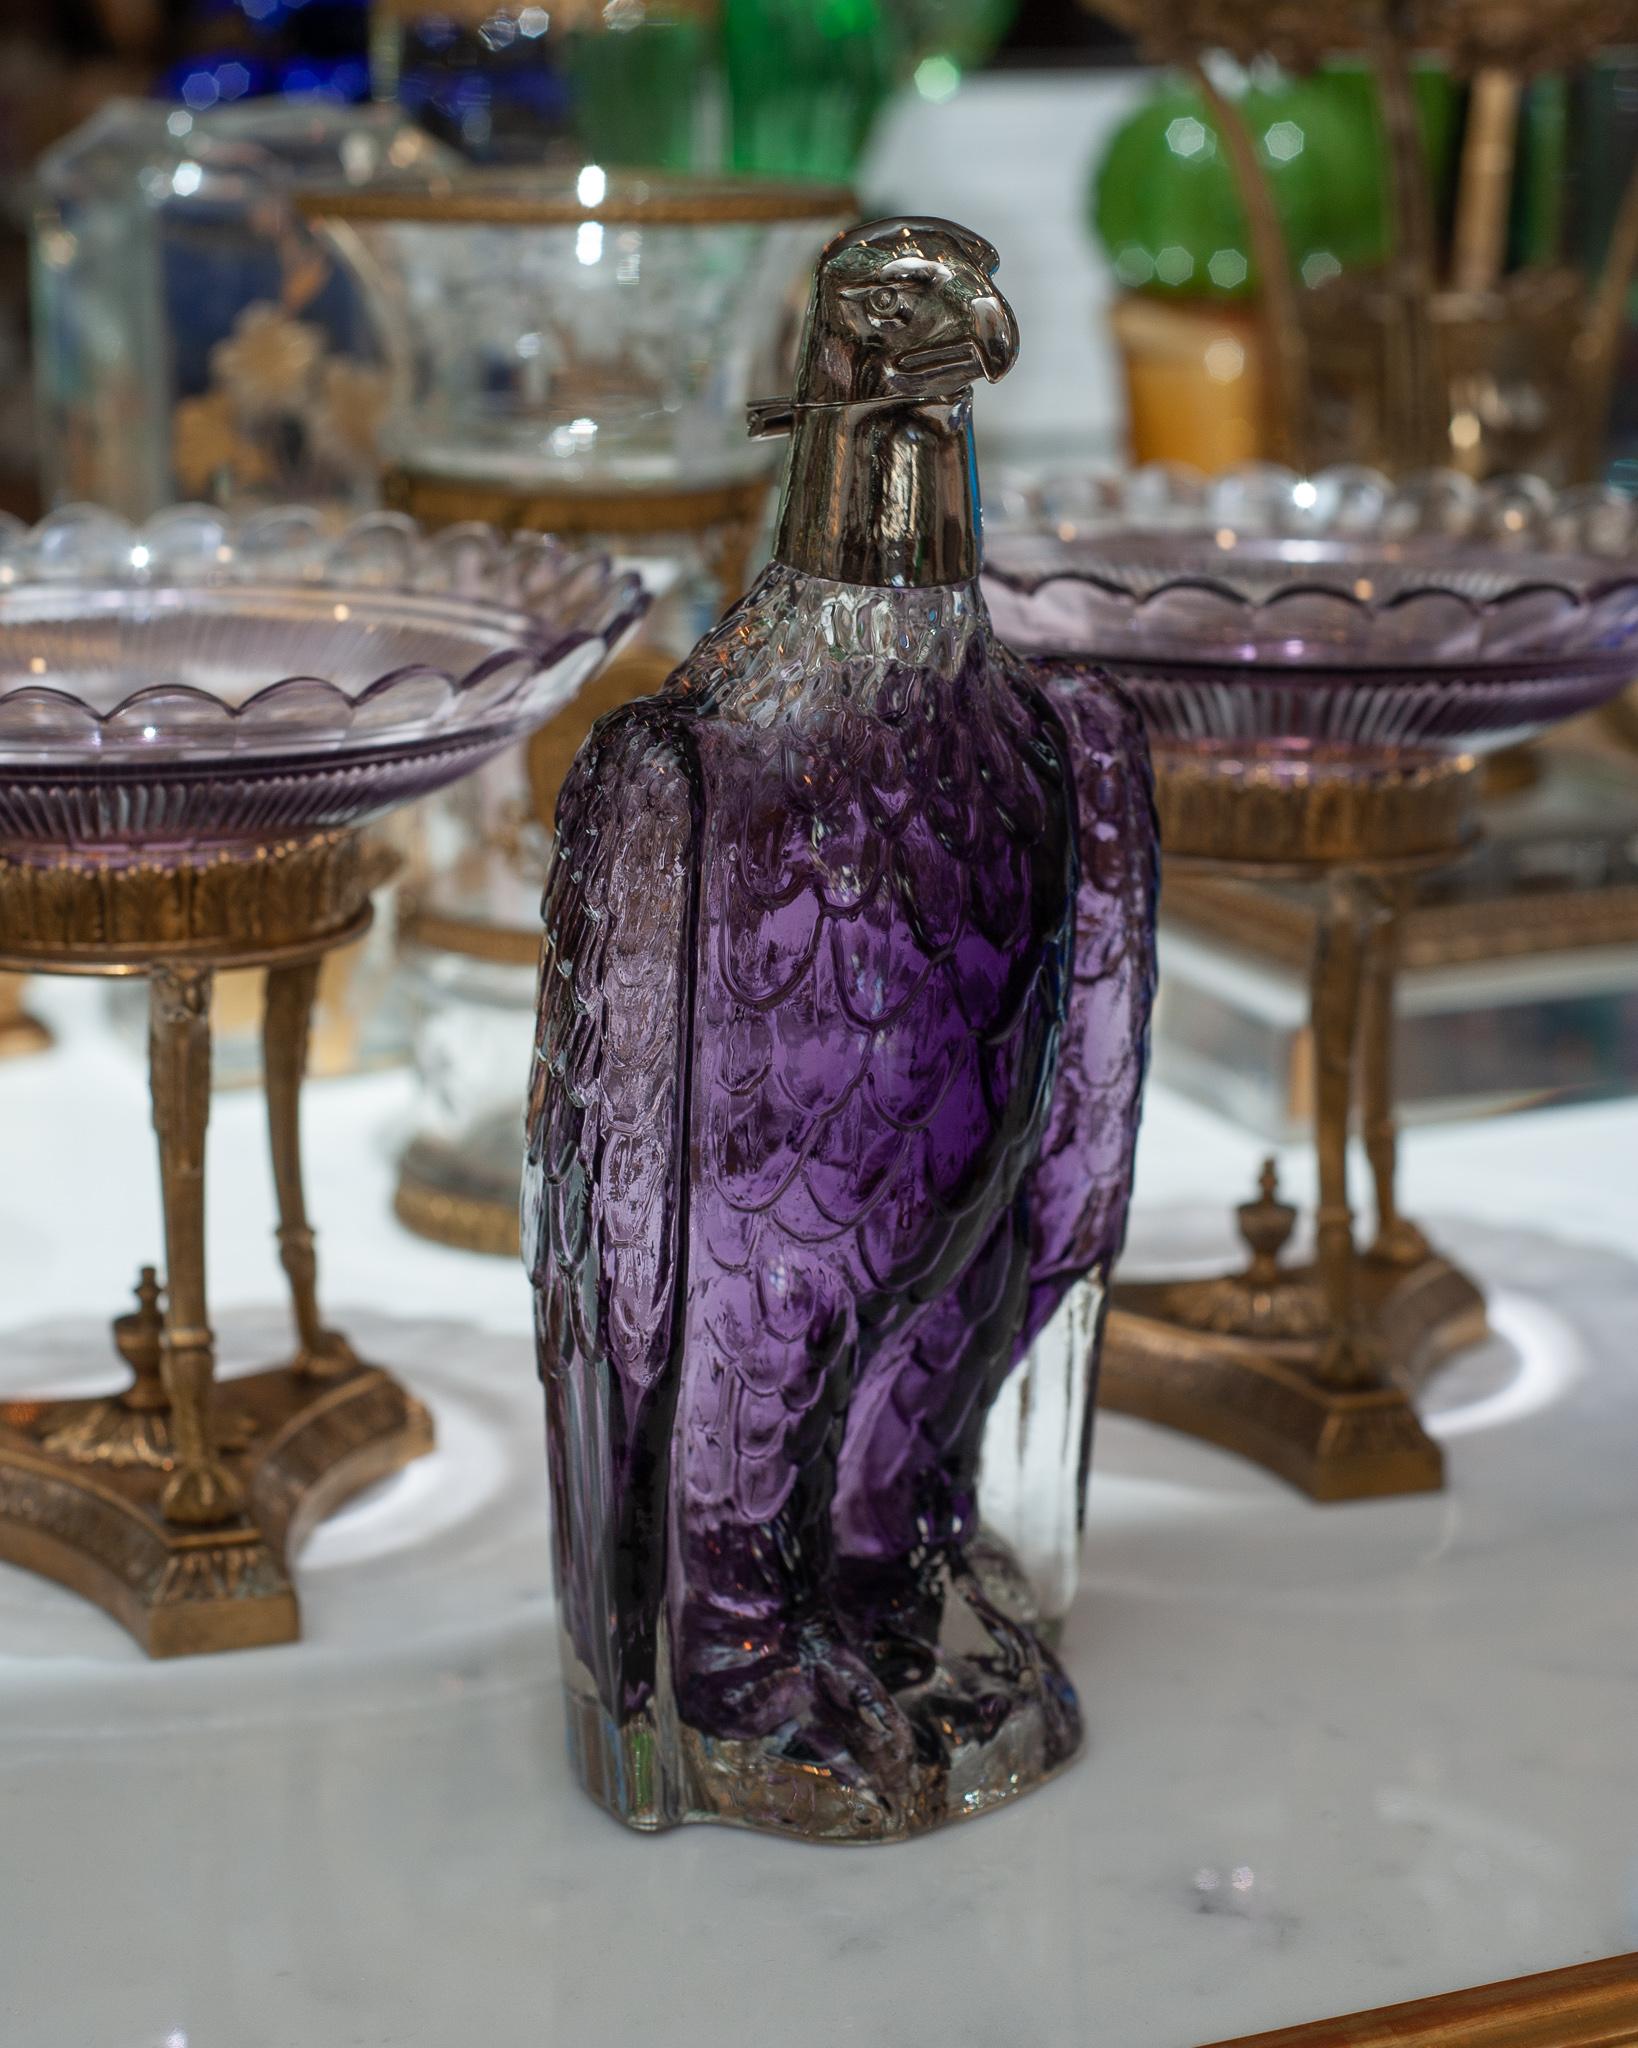 Start the night by pouring a glass of wine from this unusual silver clear to purple eagle decanter. Silver head is hinged at the neck to pour and fill. This conversation piece will enhance any evening with friends.